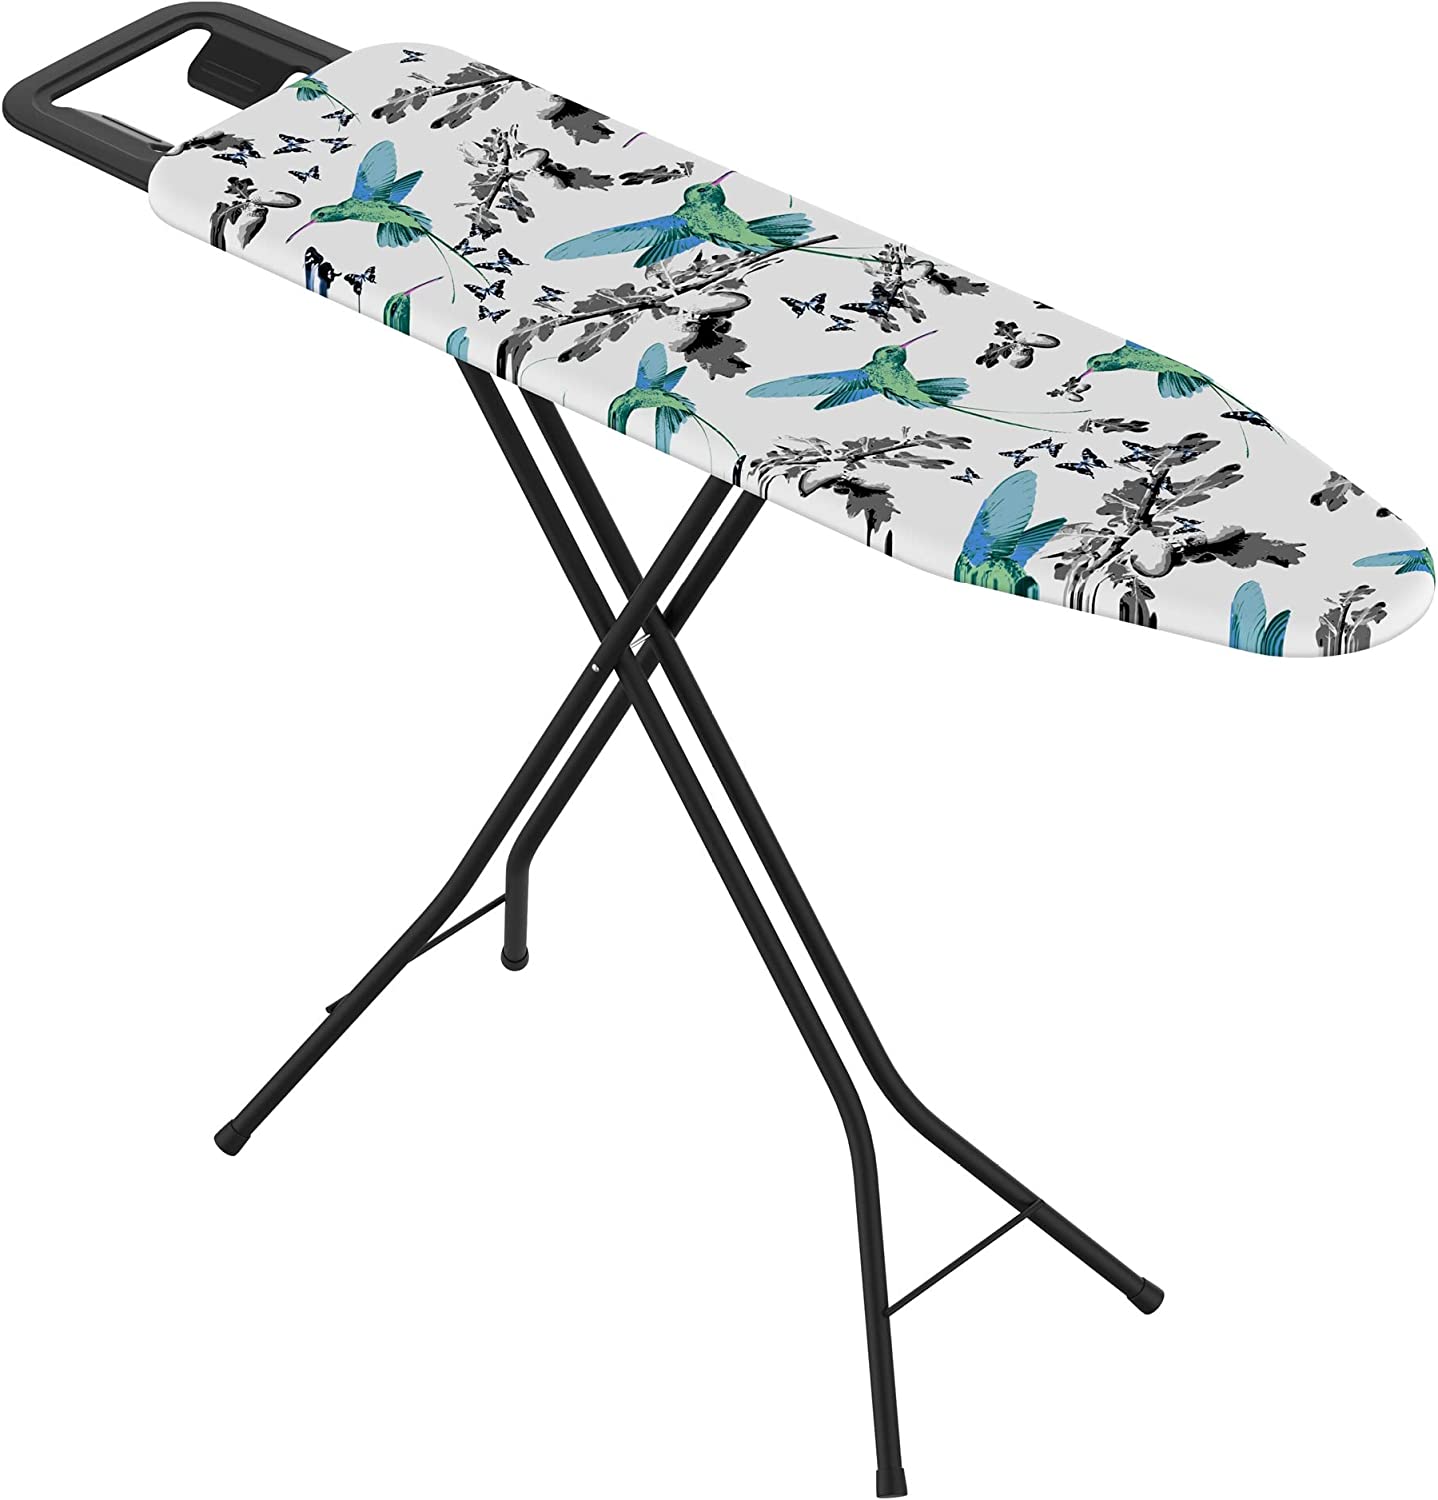 Blue/Black Adjustable Deluxe Ironing Board with Iron Rest